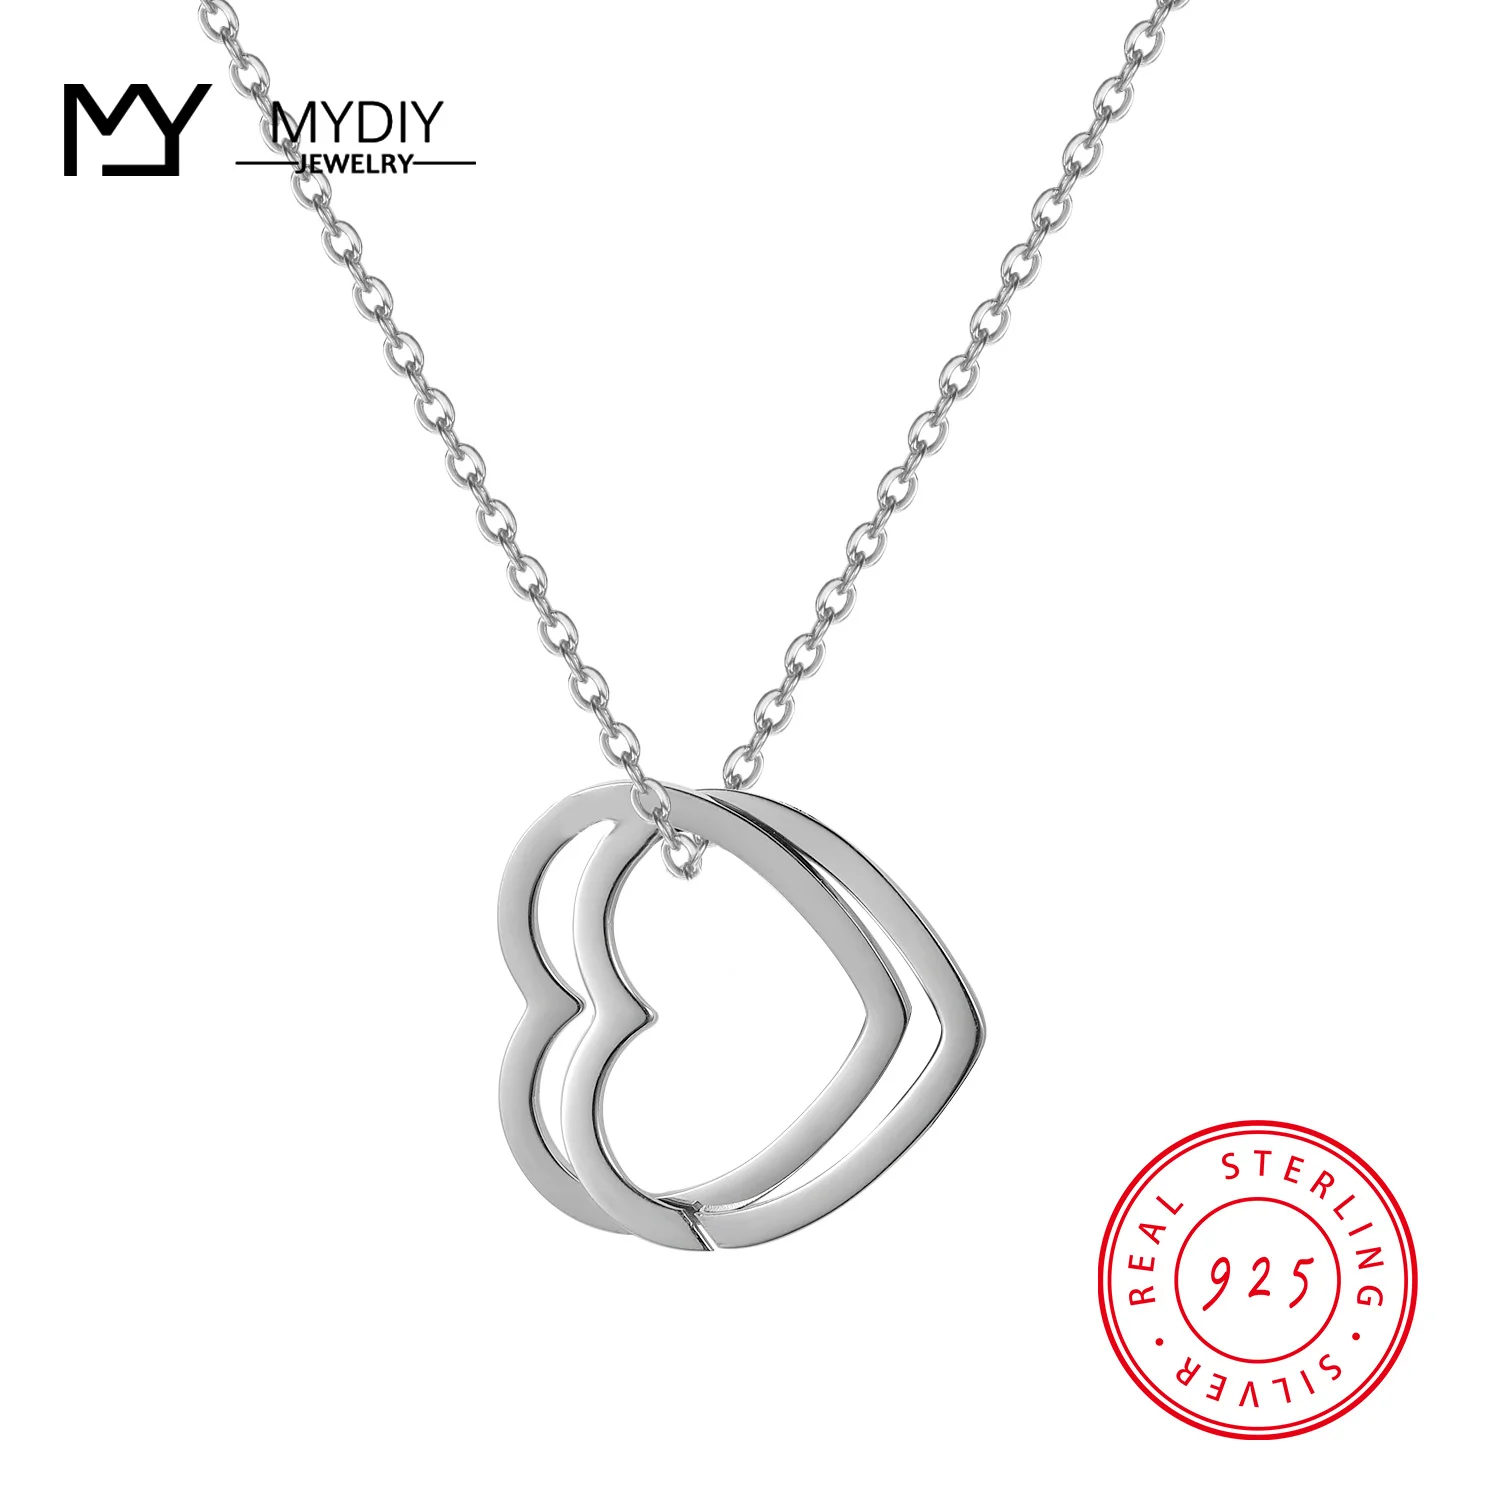 Personalized Necklaces 925 Sterling Silver Jewelry Heart Pendant DIY  Name Necklace Promise Anniversary Gift for Women personalized name bookmark custom heart page corner bookmark leather book mark for readers anniversary gift wedding gift for her